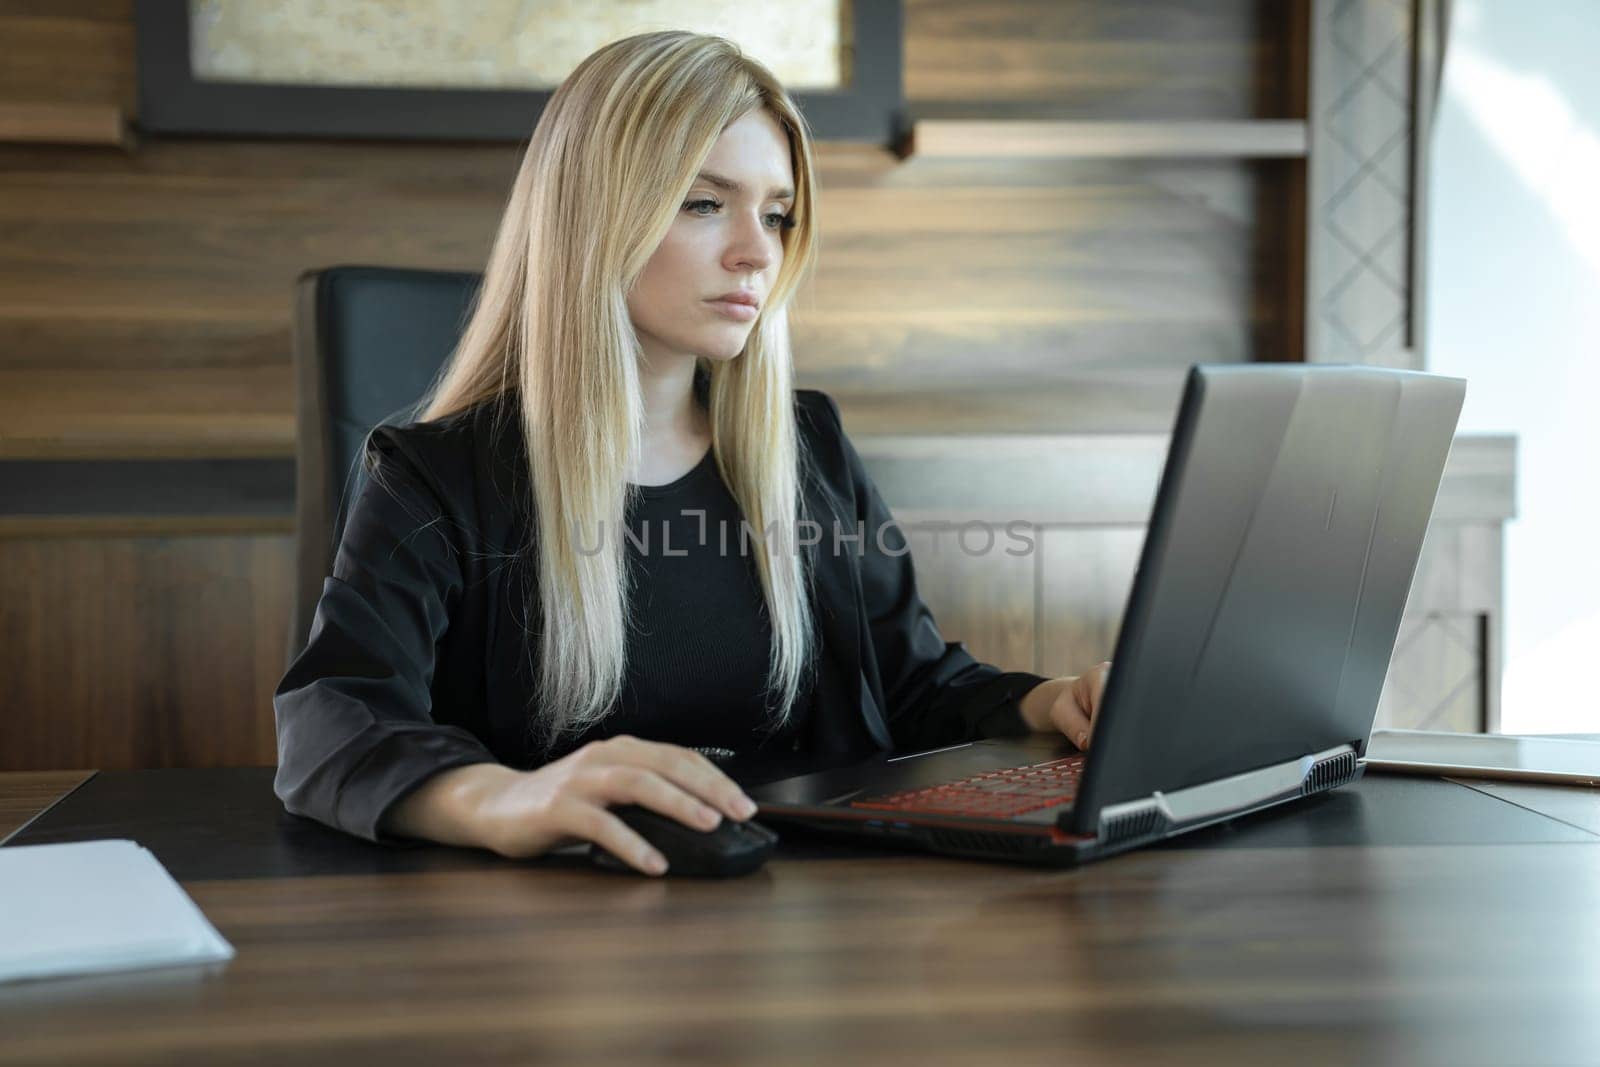 Blonde girl in business clothes sits in front of laptop in office and works intently, concept of online education and work by Laguna781